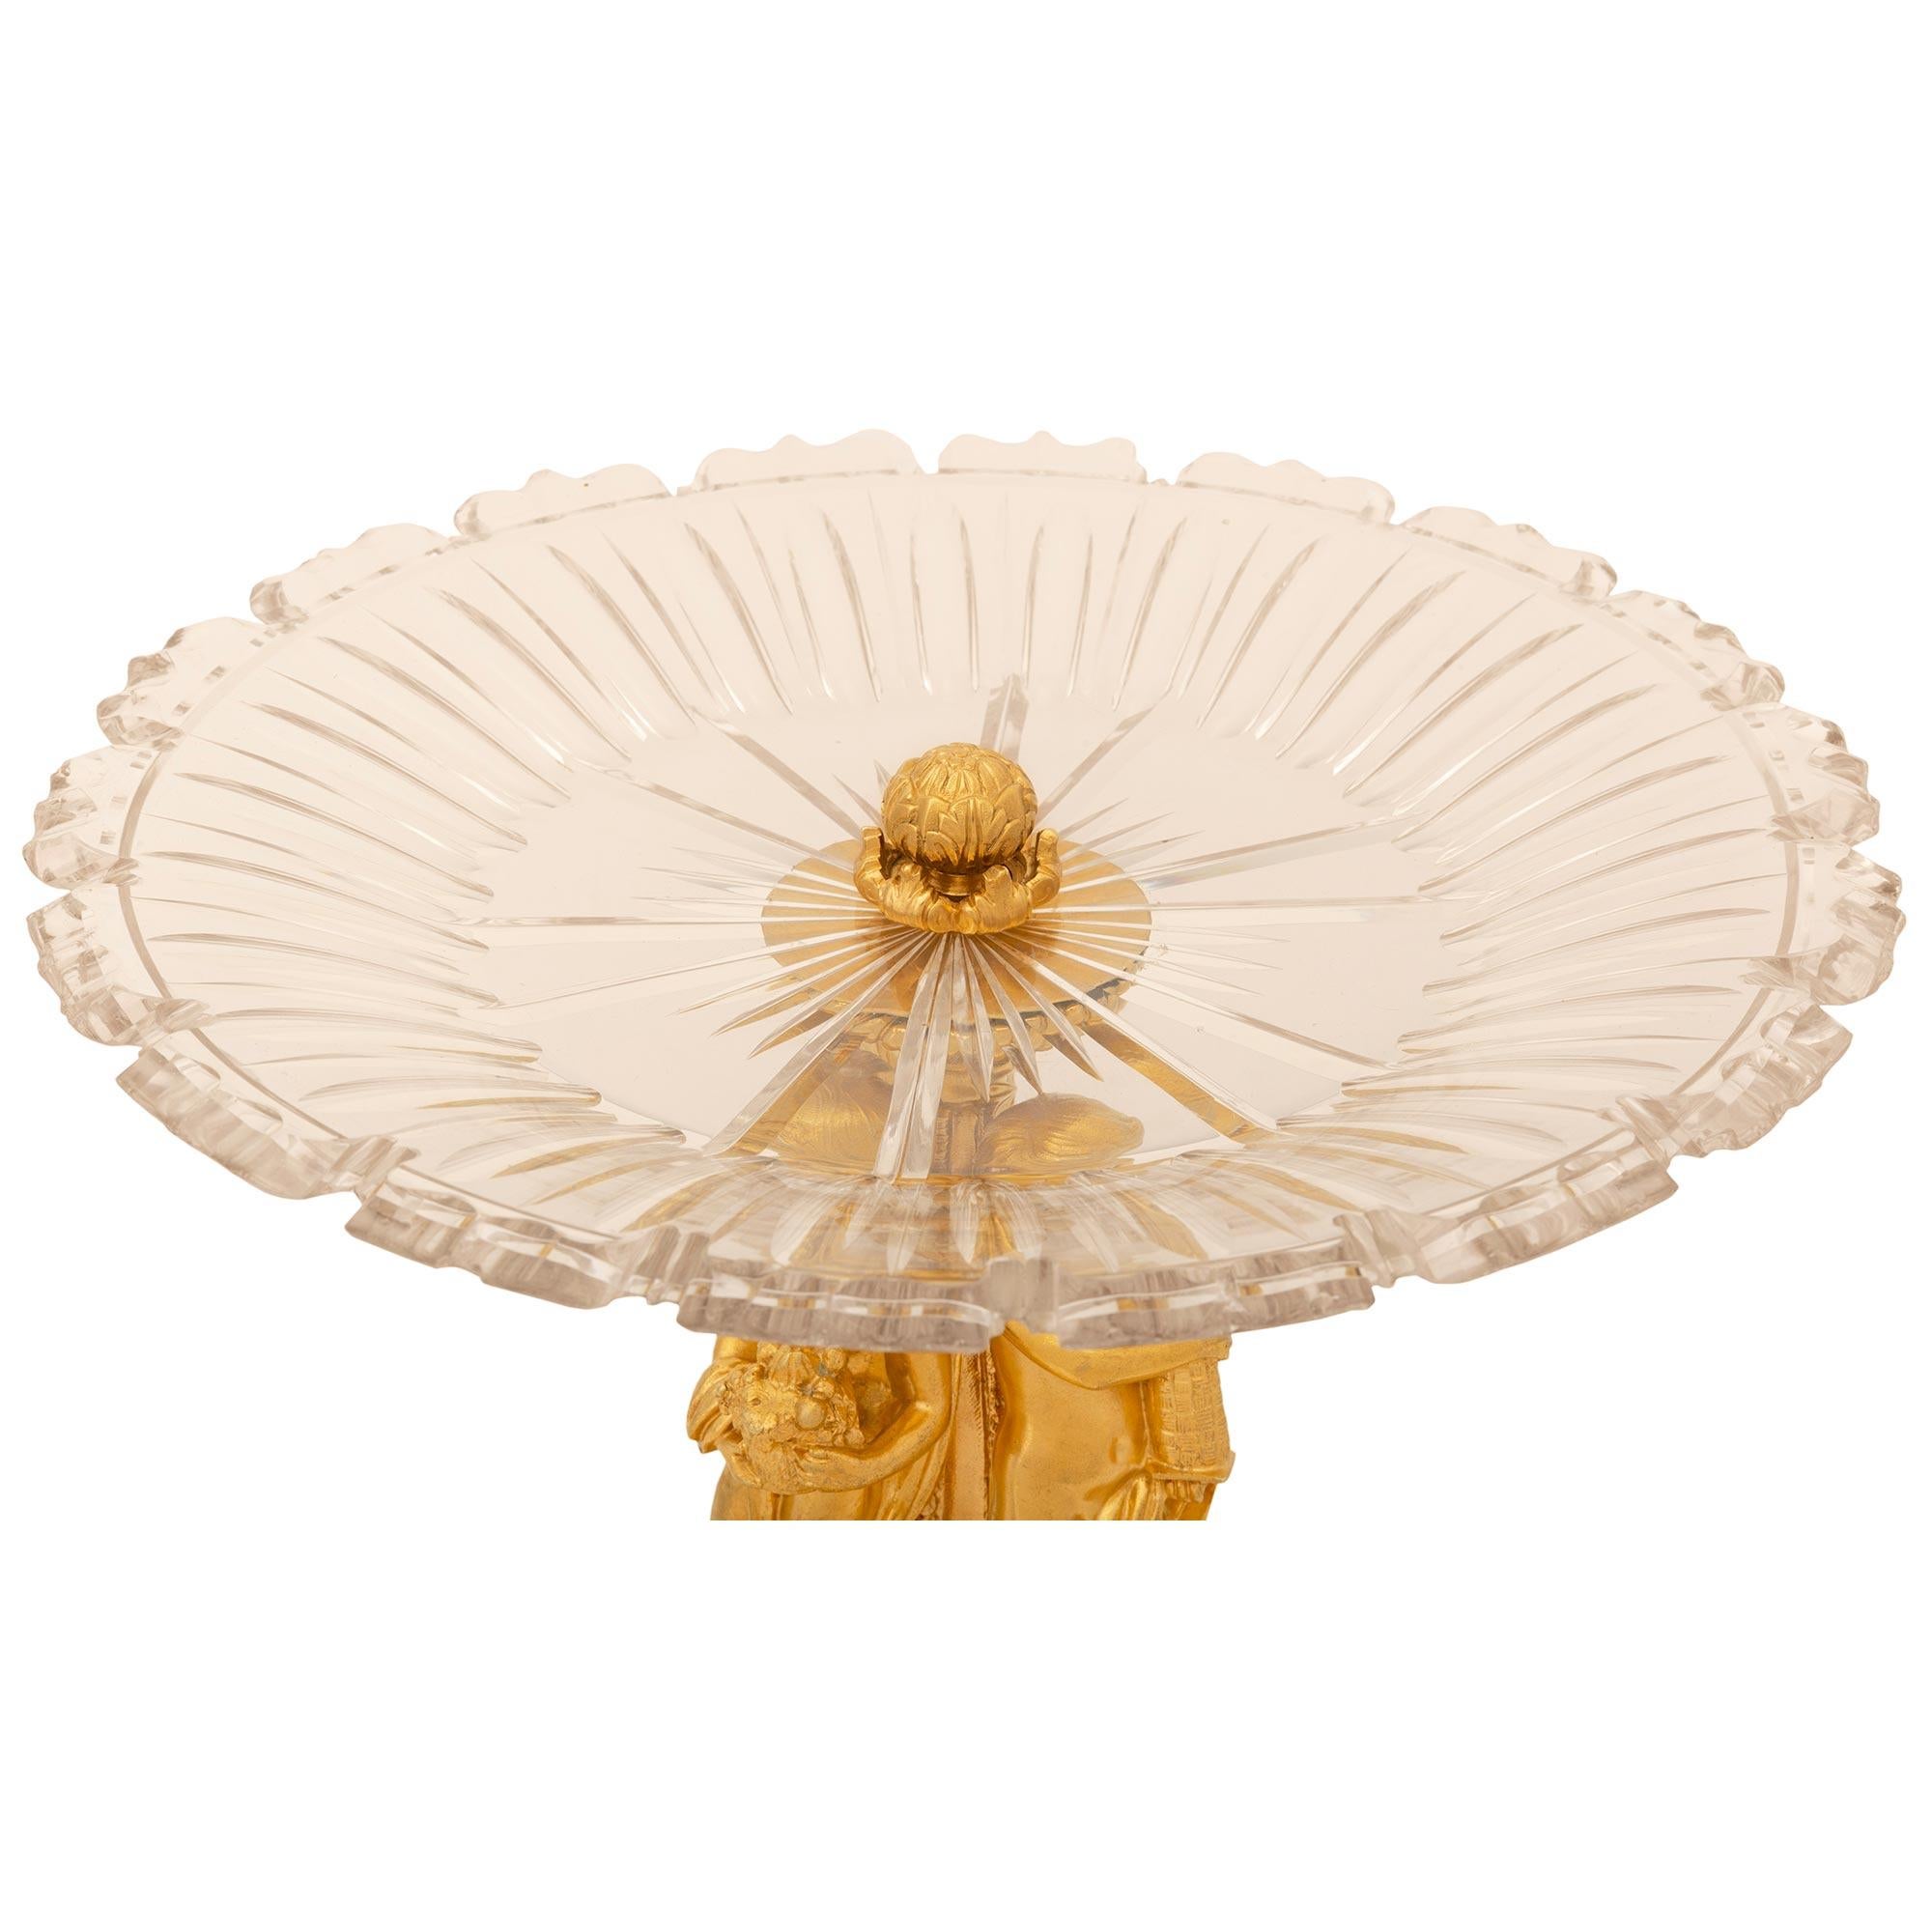 French 19th Century Belle Époque Period Ormolu and Baccarat Crystal Centerpiece For Sale 1